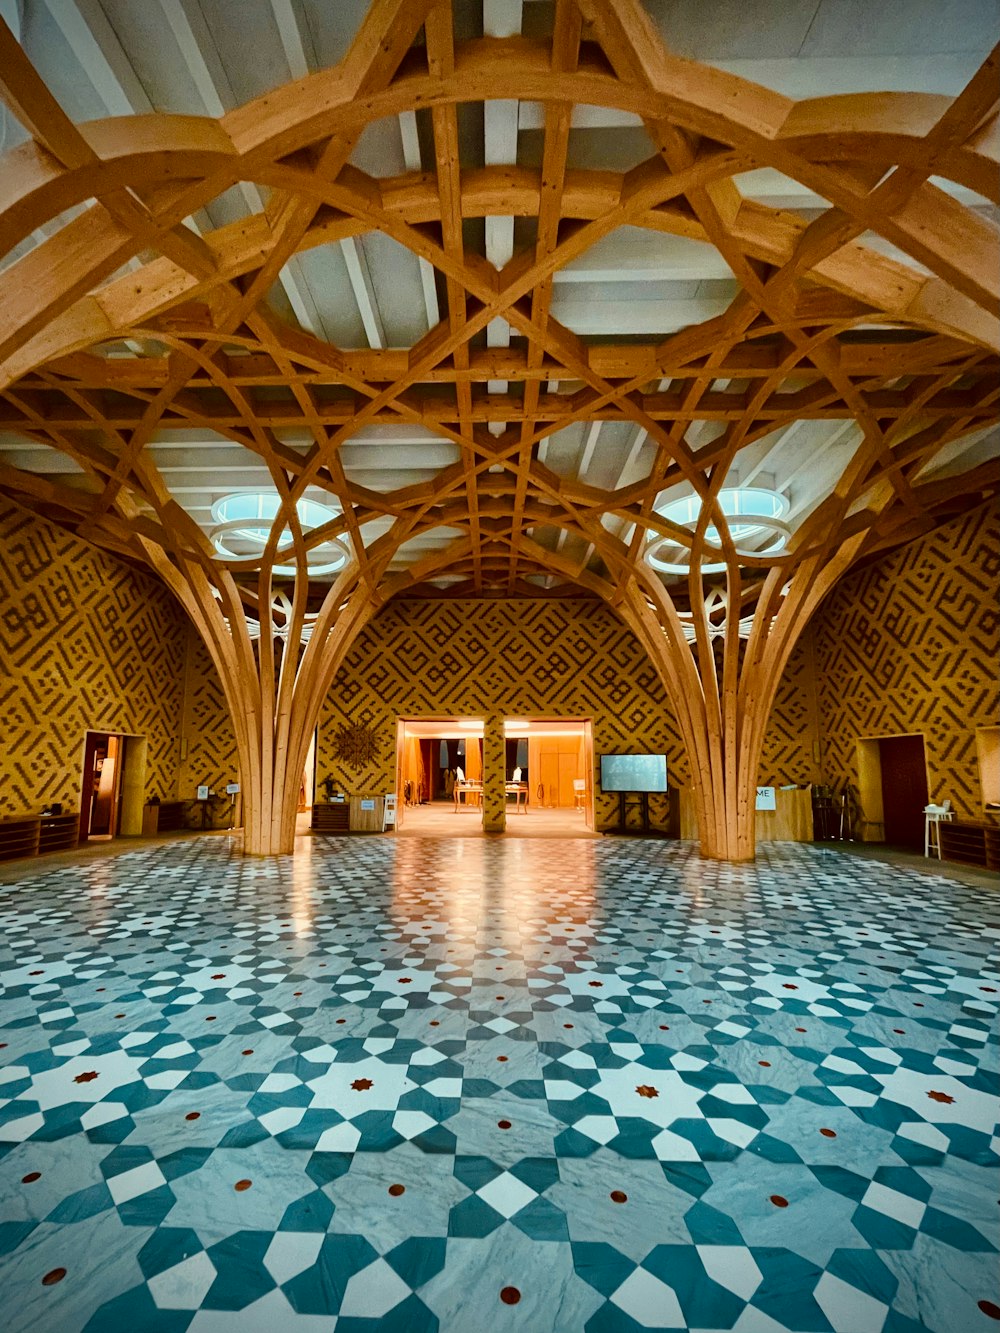 a large room with a tiled floor and wooden beams